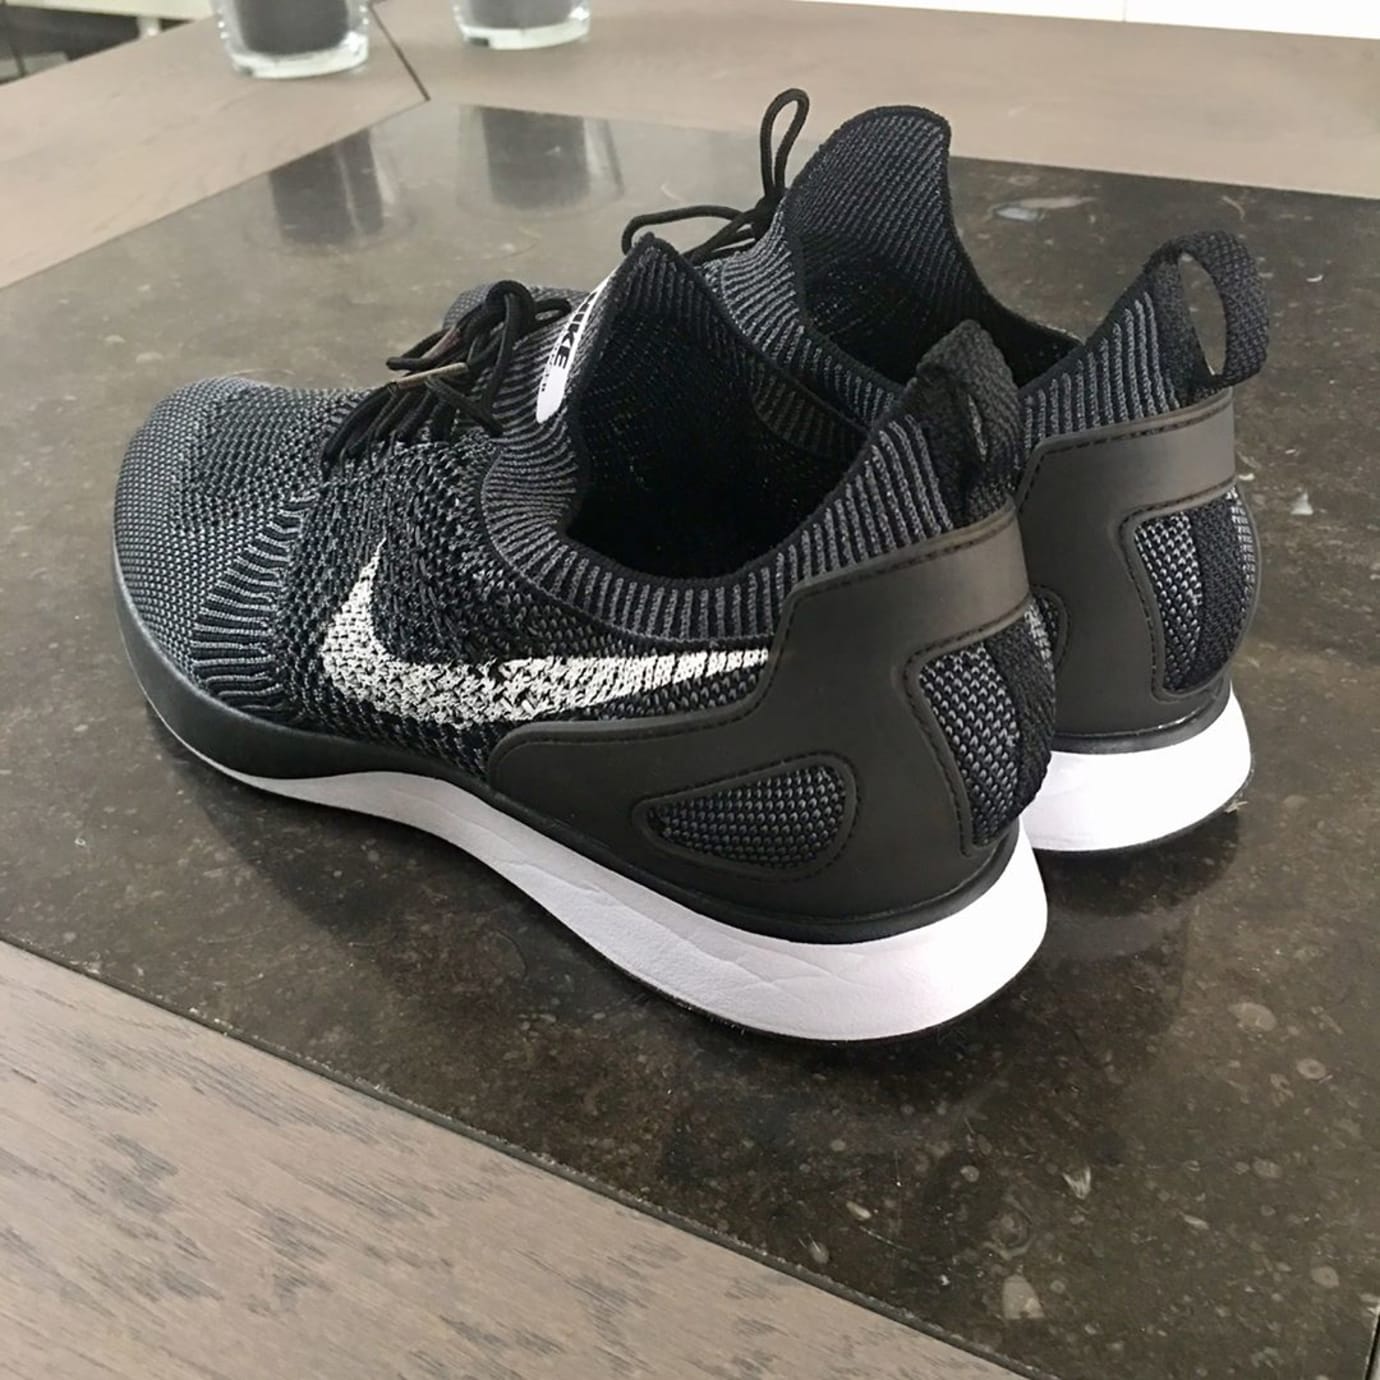 Nike Mariah Racer Black Flyknit | Sole Collector